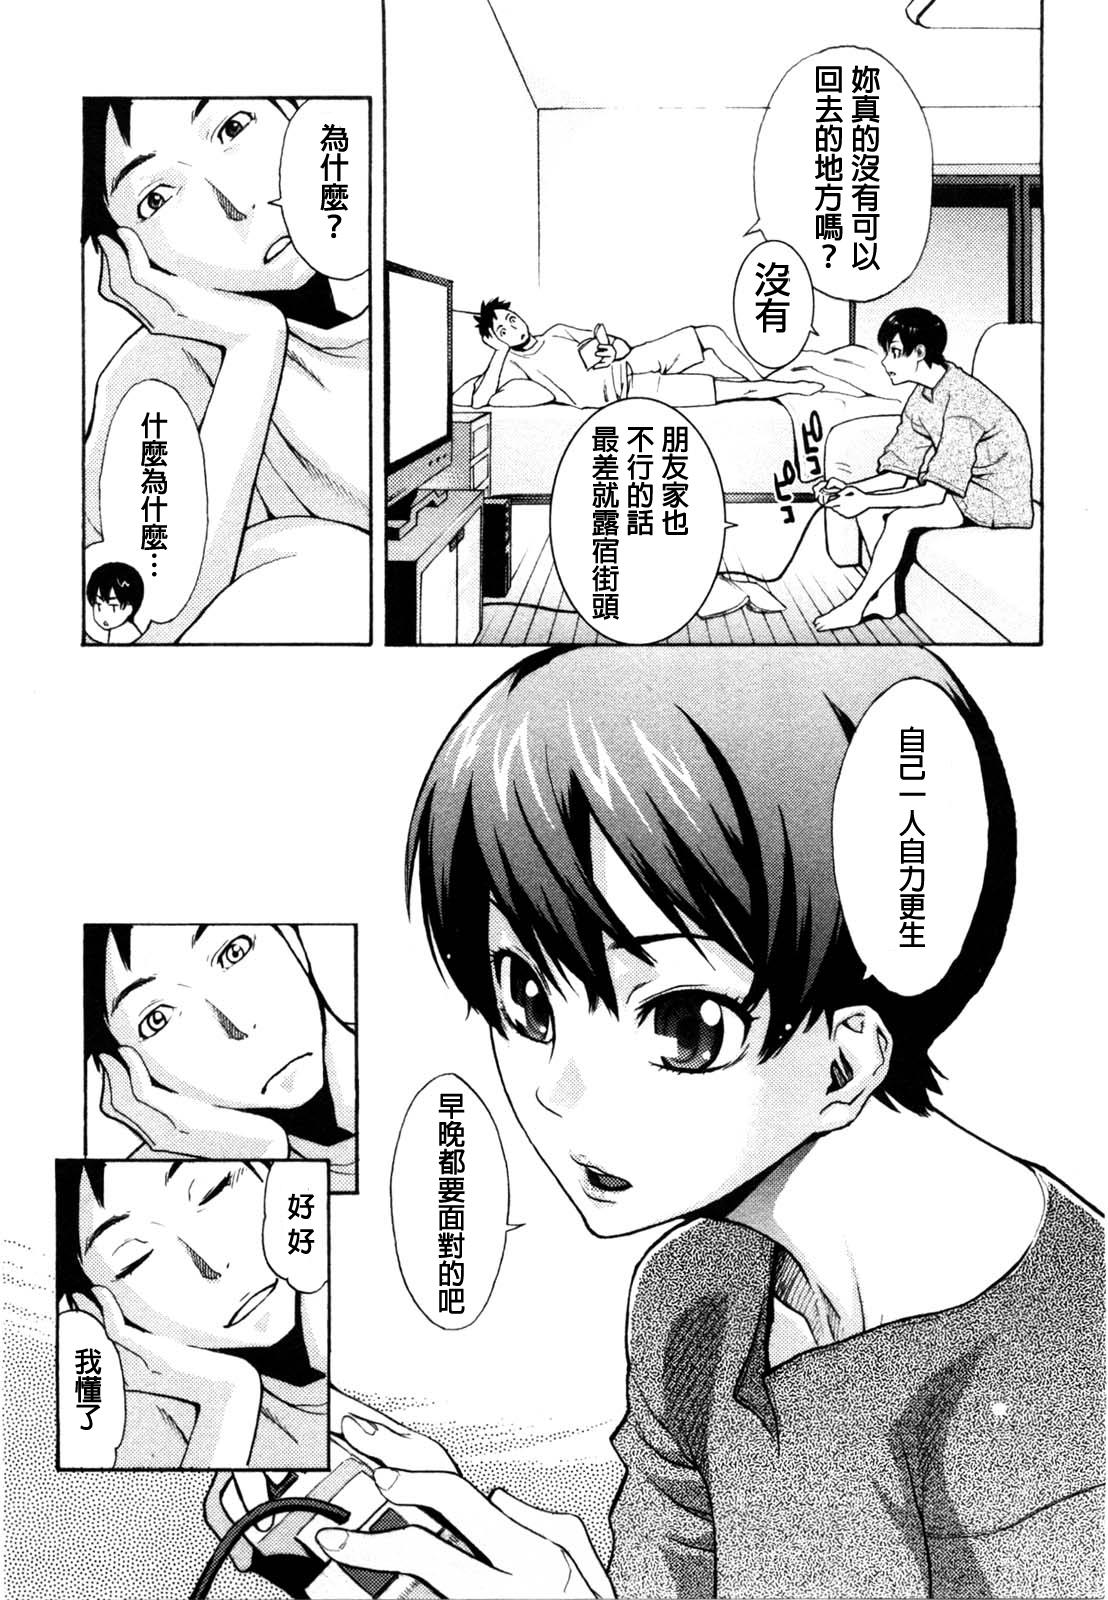  Sanchoume no Tama | Tama from Third Street Ch. 1 Squirt - Page 10